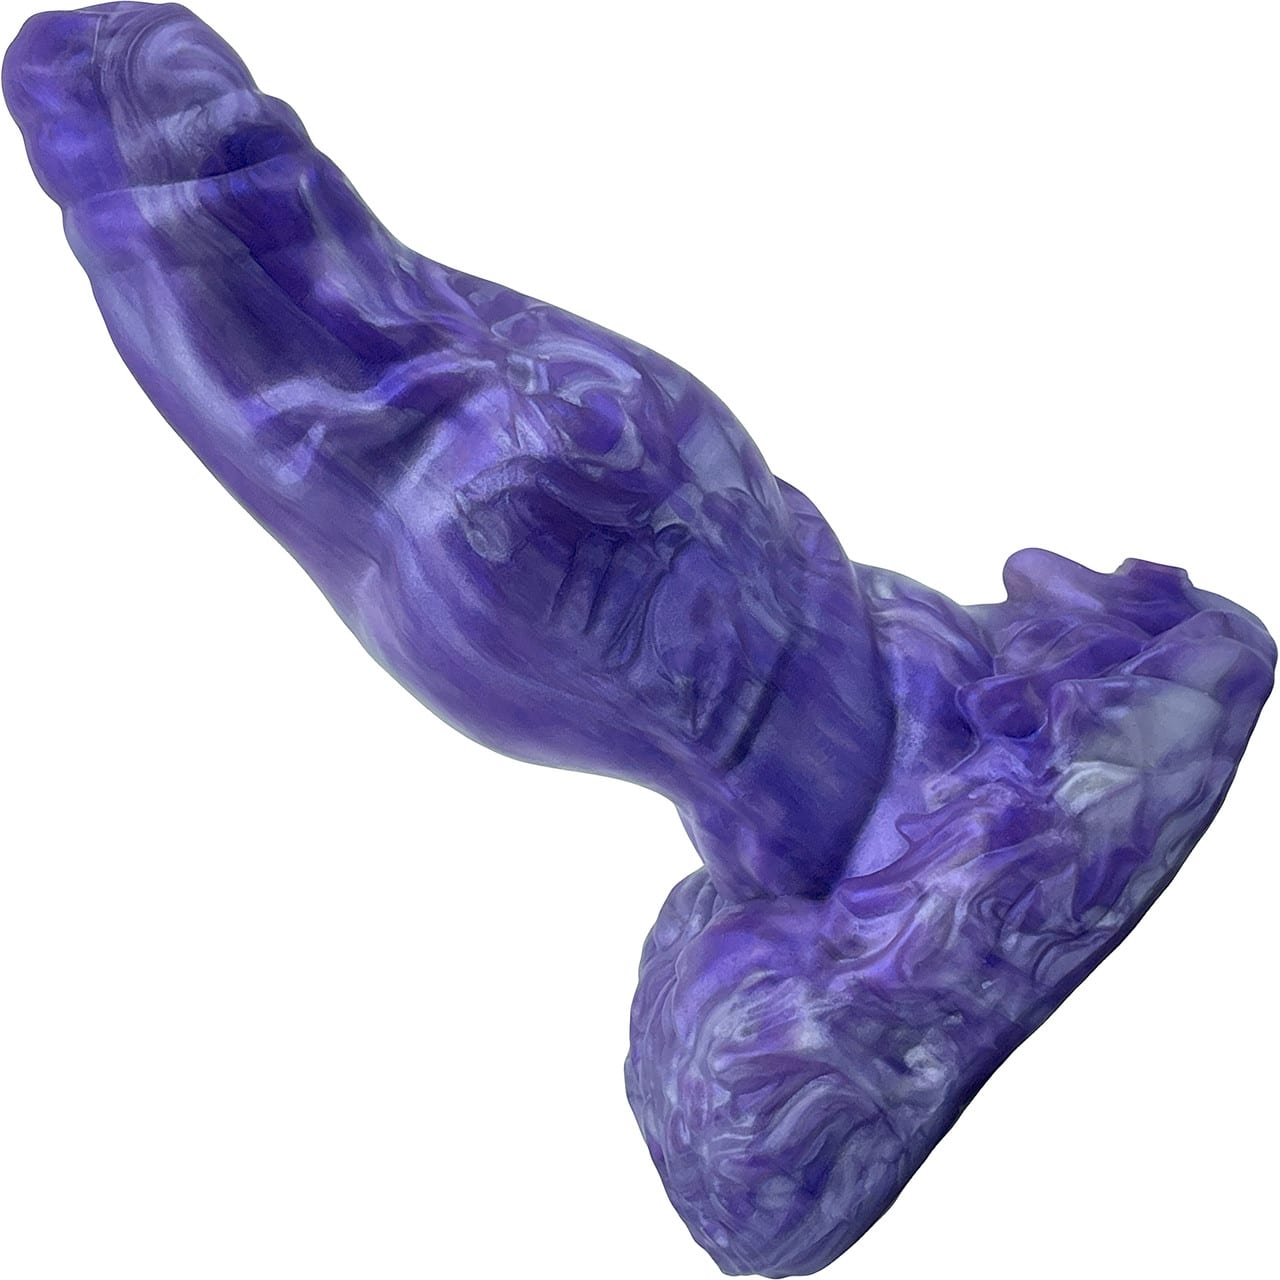 Uncover Creations The Werewolf Dog Dildo. Slide 9